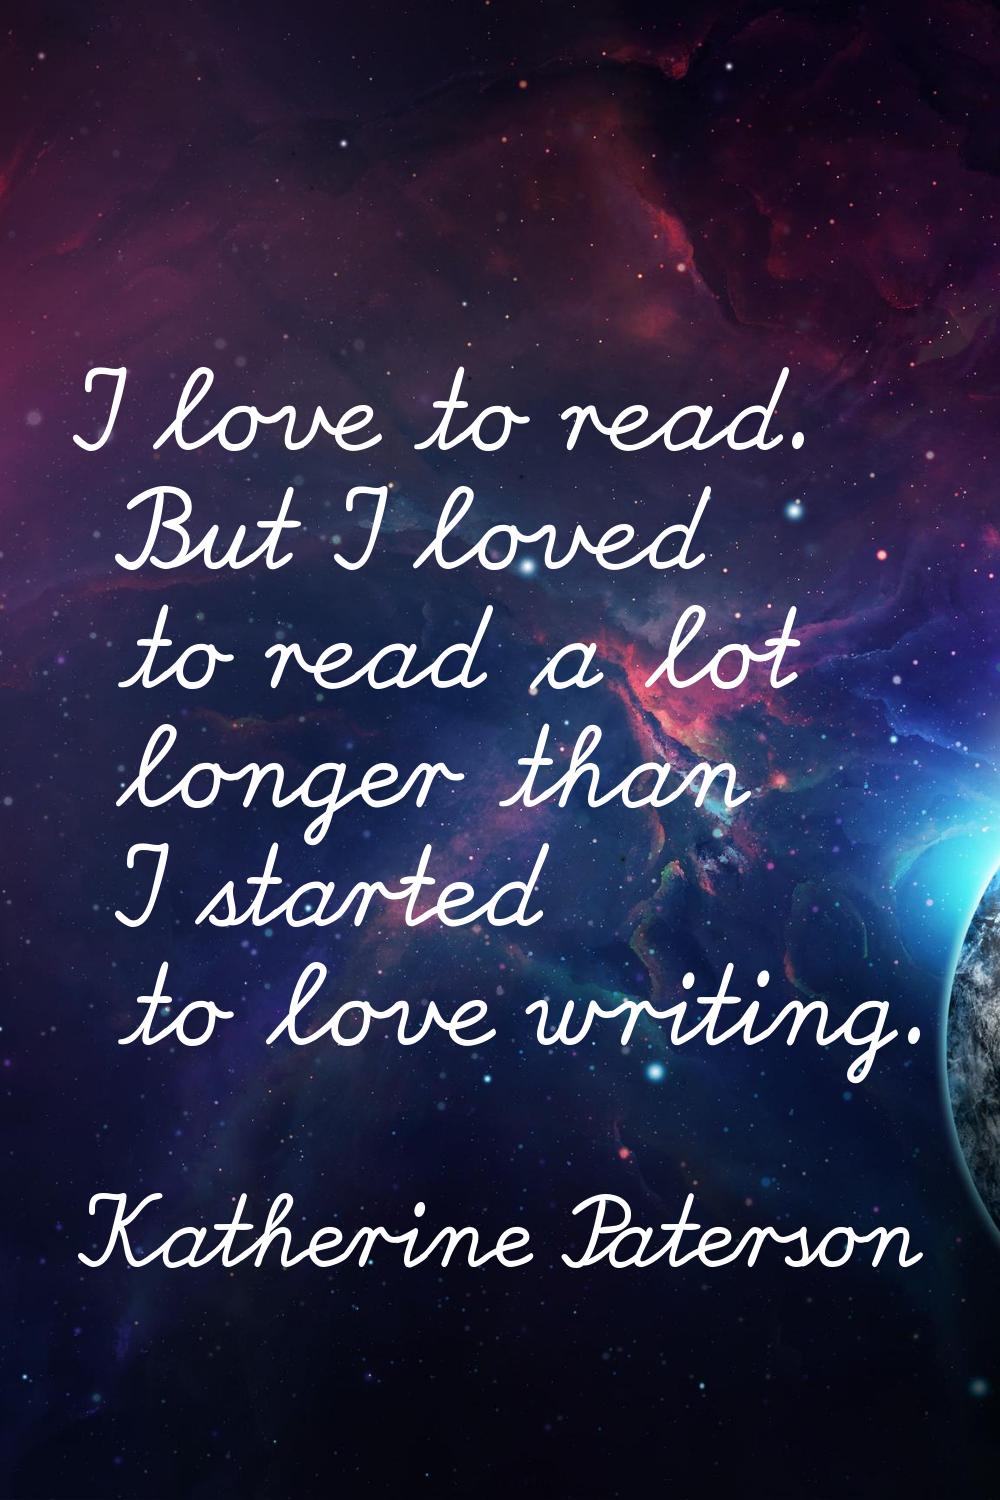 I love to read. But I loved to read a lot longer than I started to love writing.